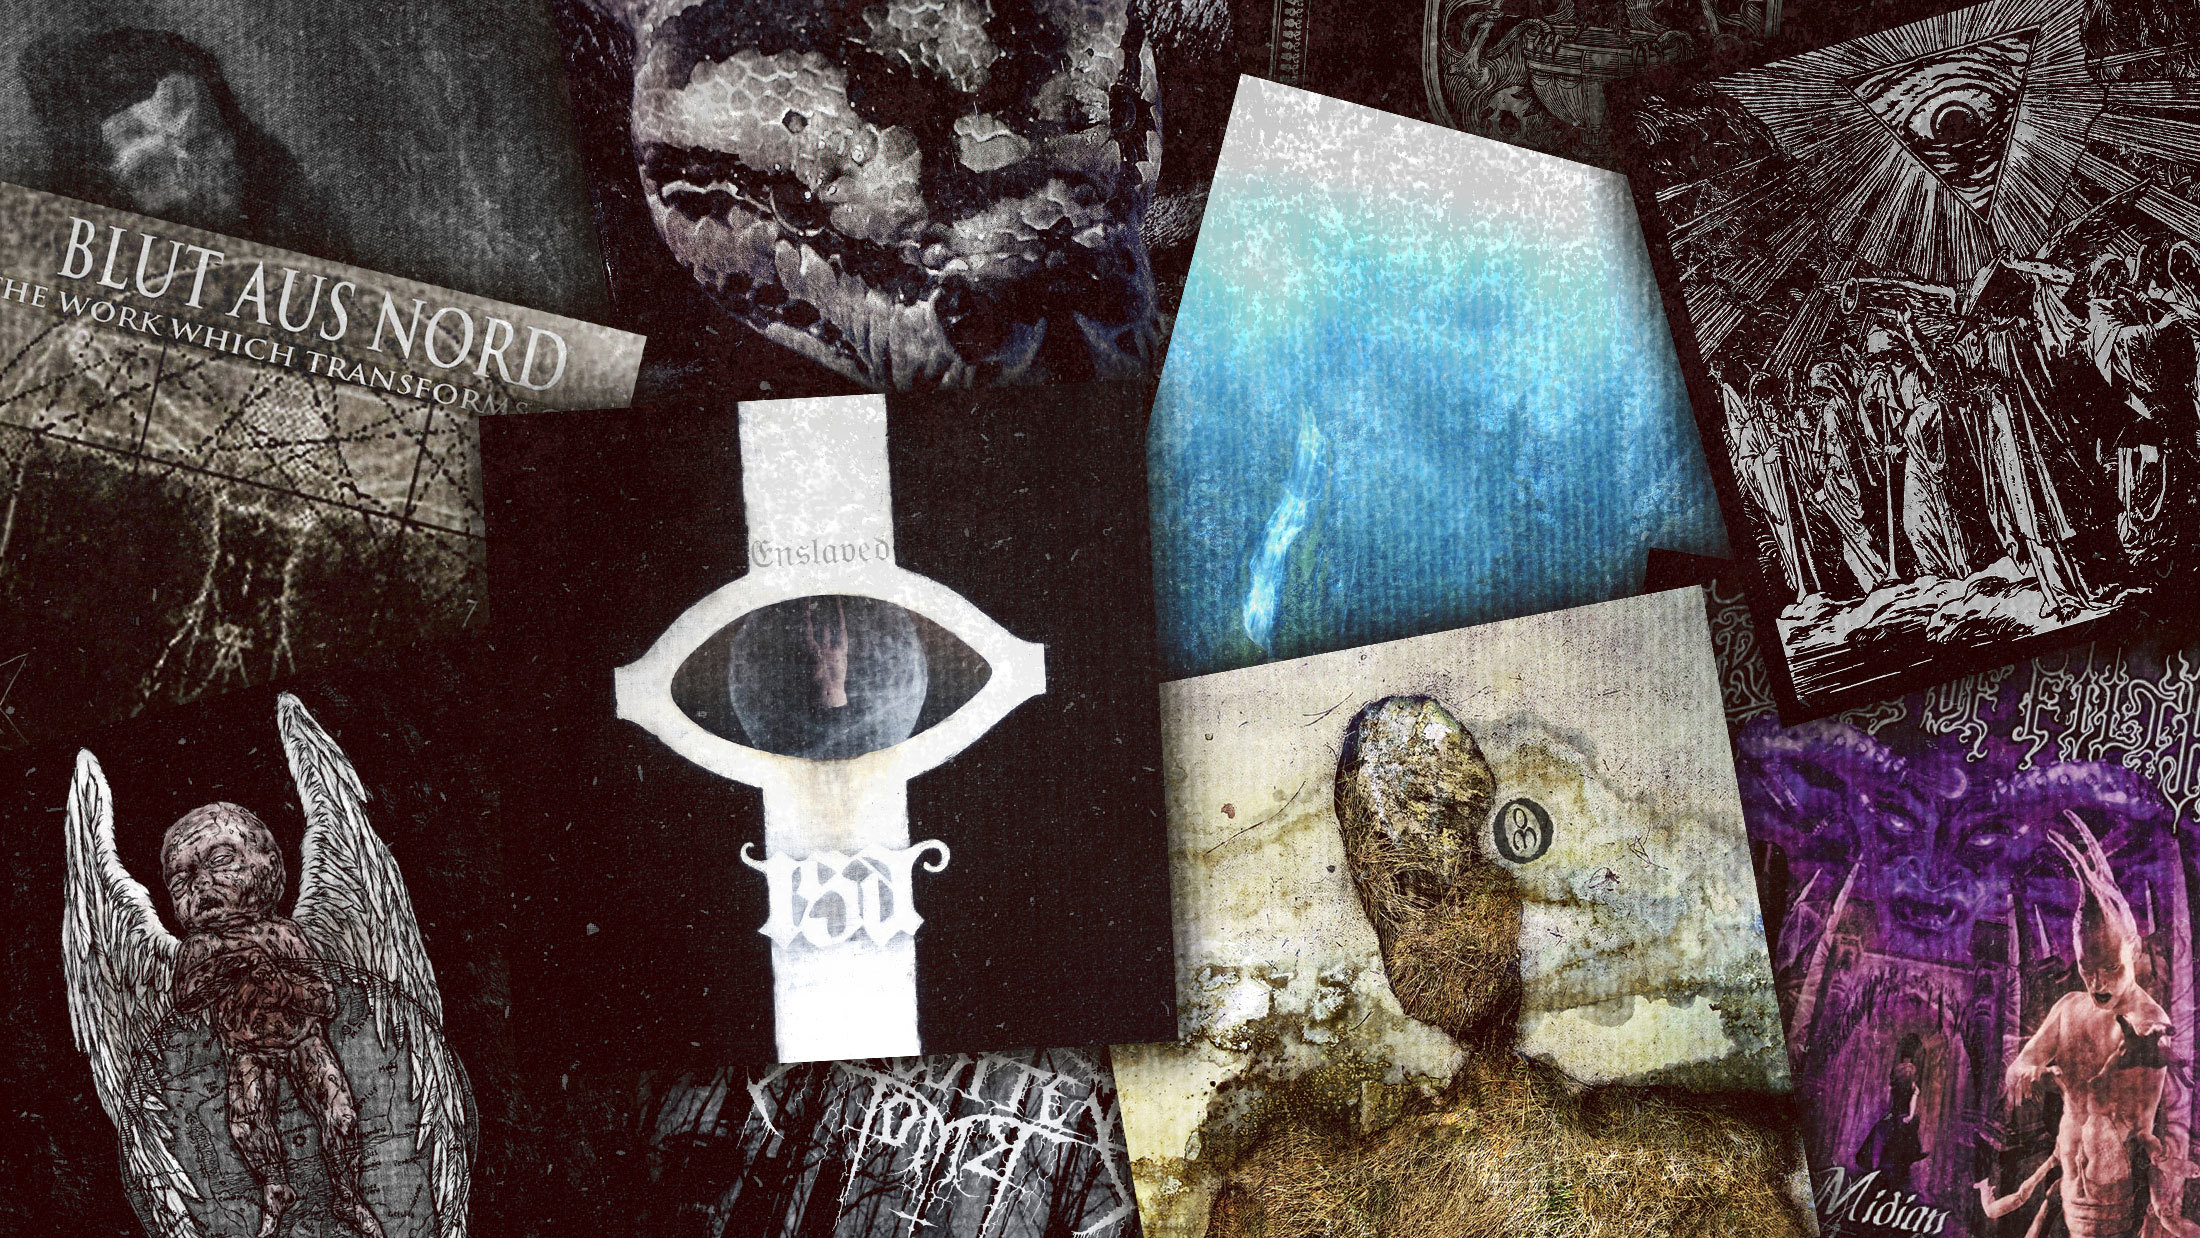 The 13 black metal albums of the 21st century |